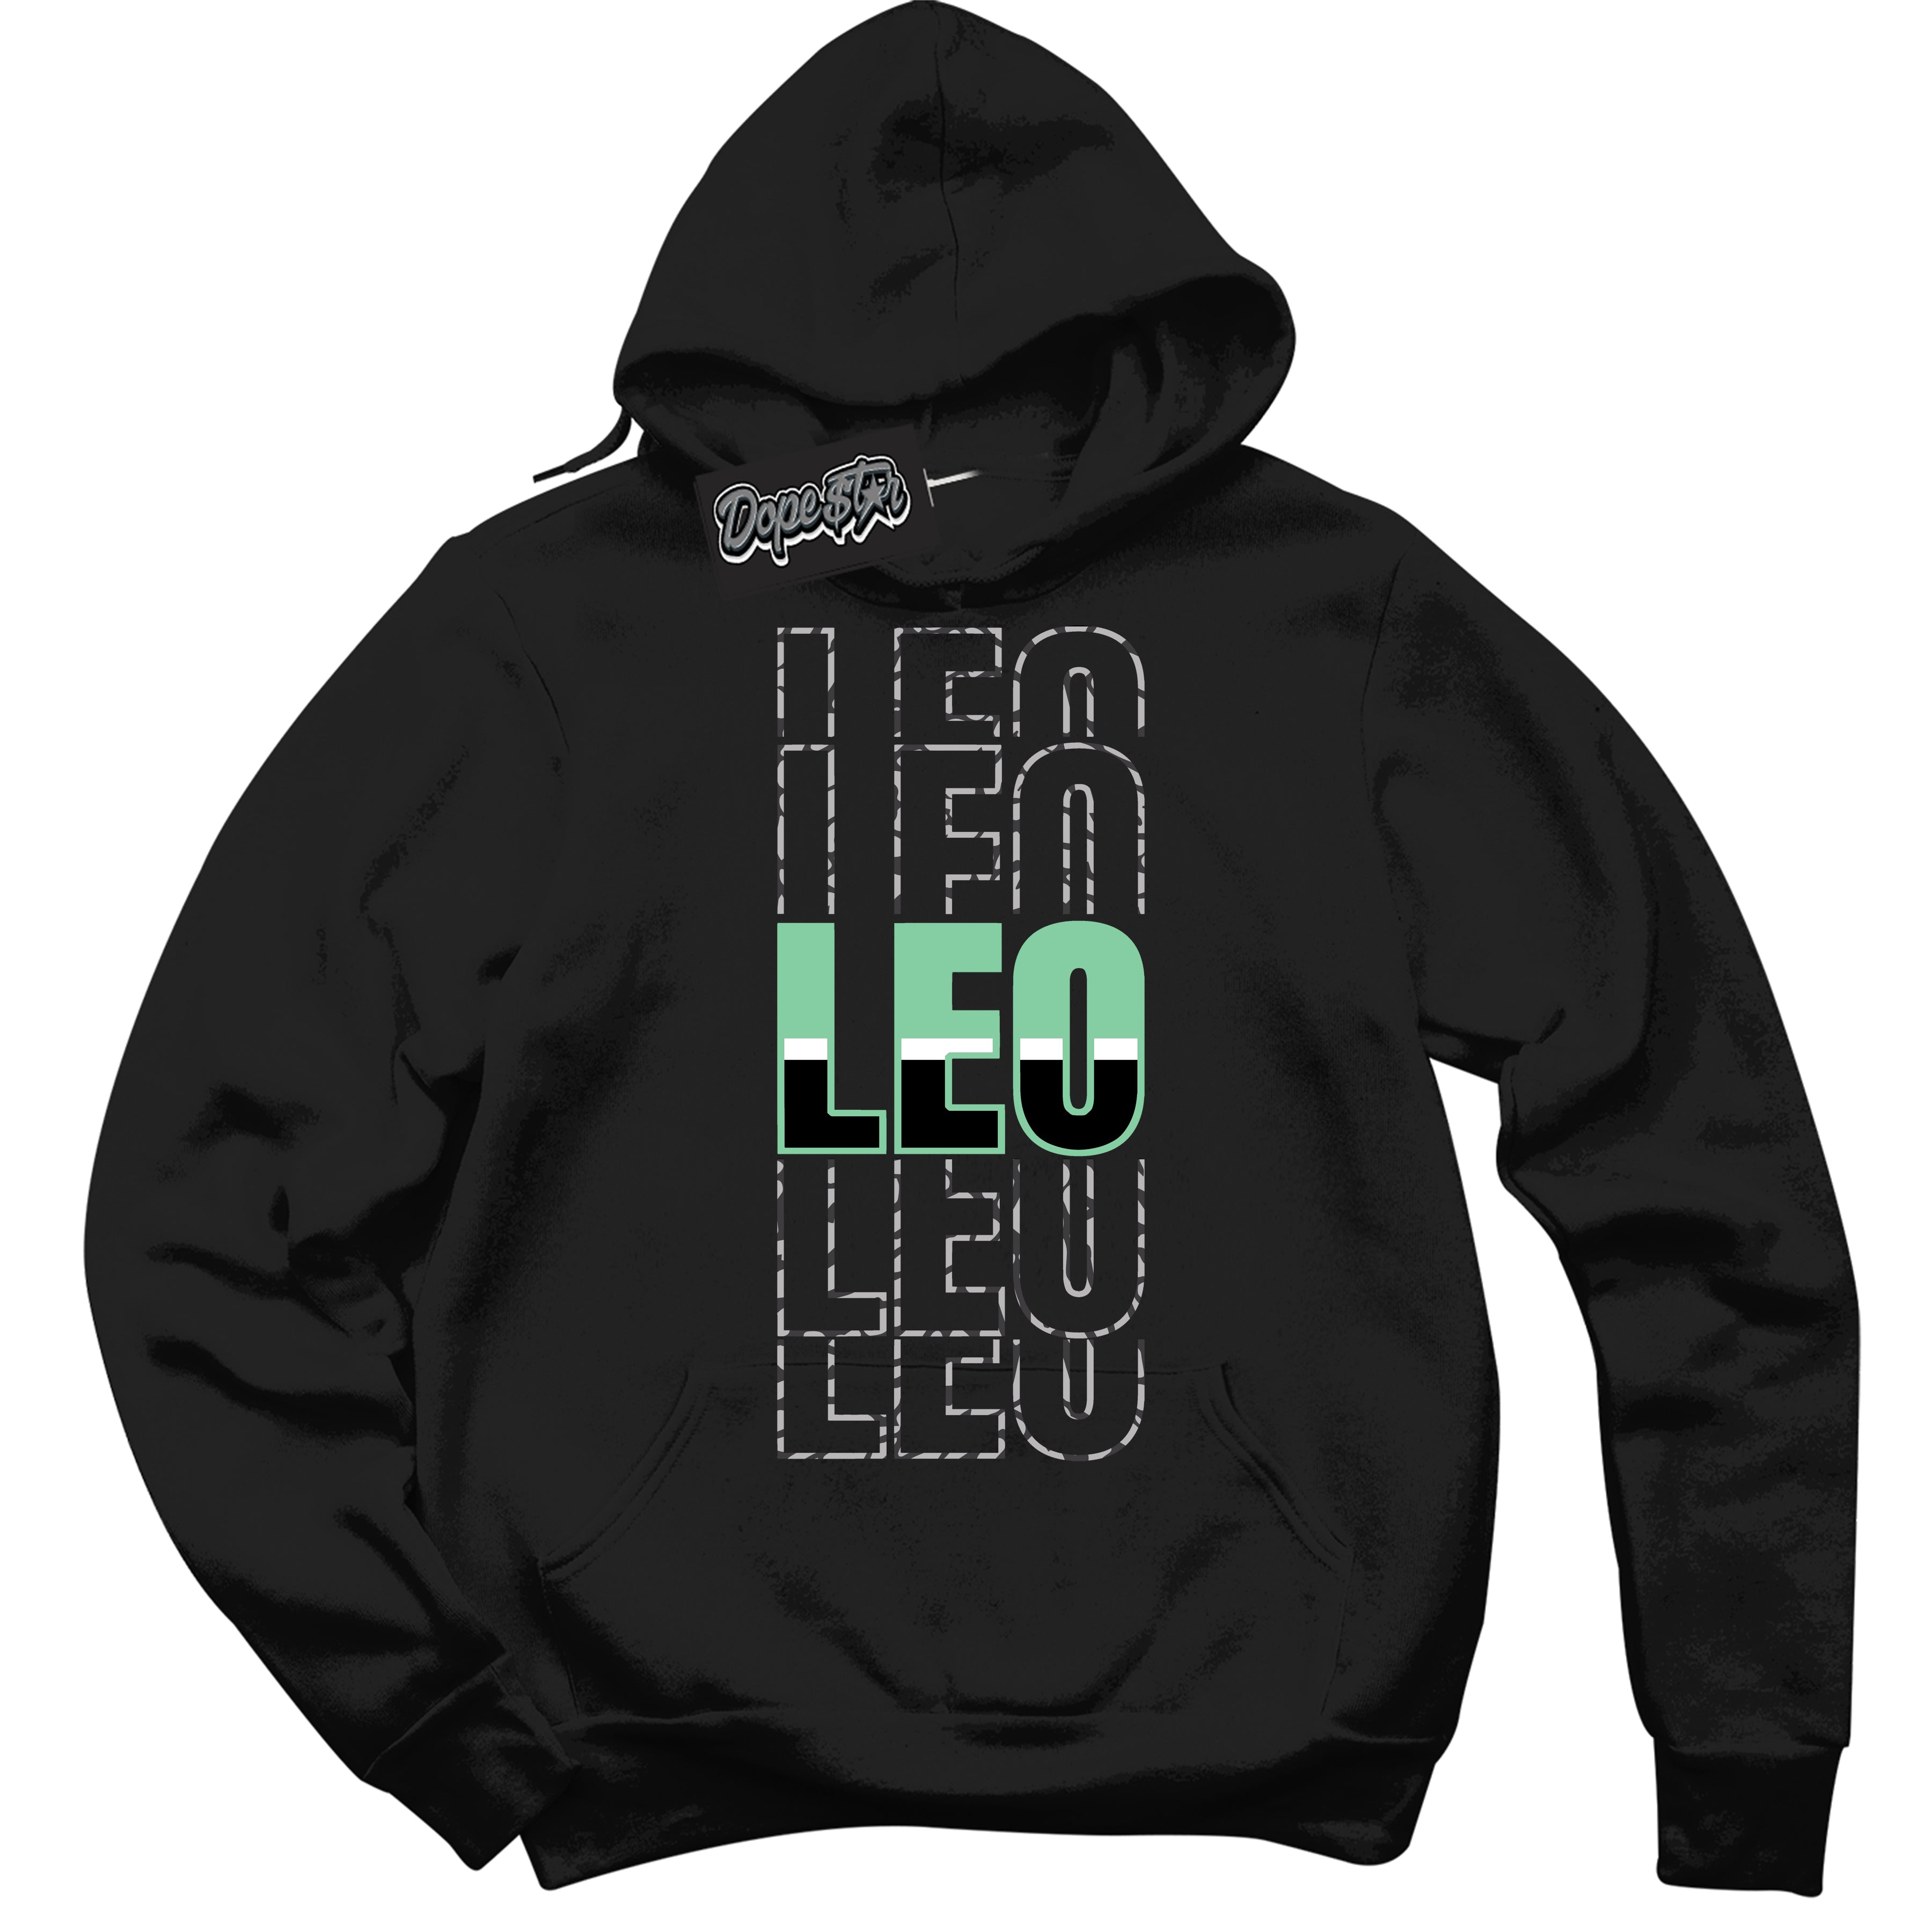 Cool Black Graphic DopeStar Hoodie with “ Leo “ print, that perfectly matches Green Glow 3S sneakers